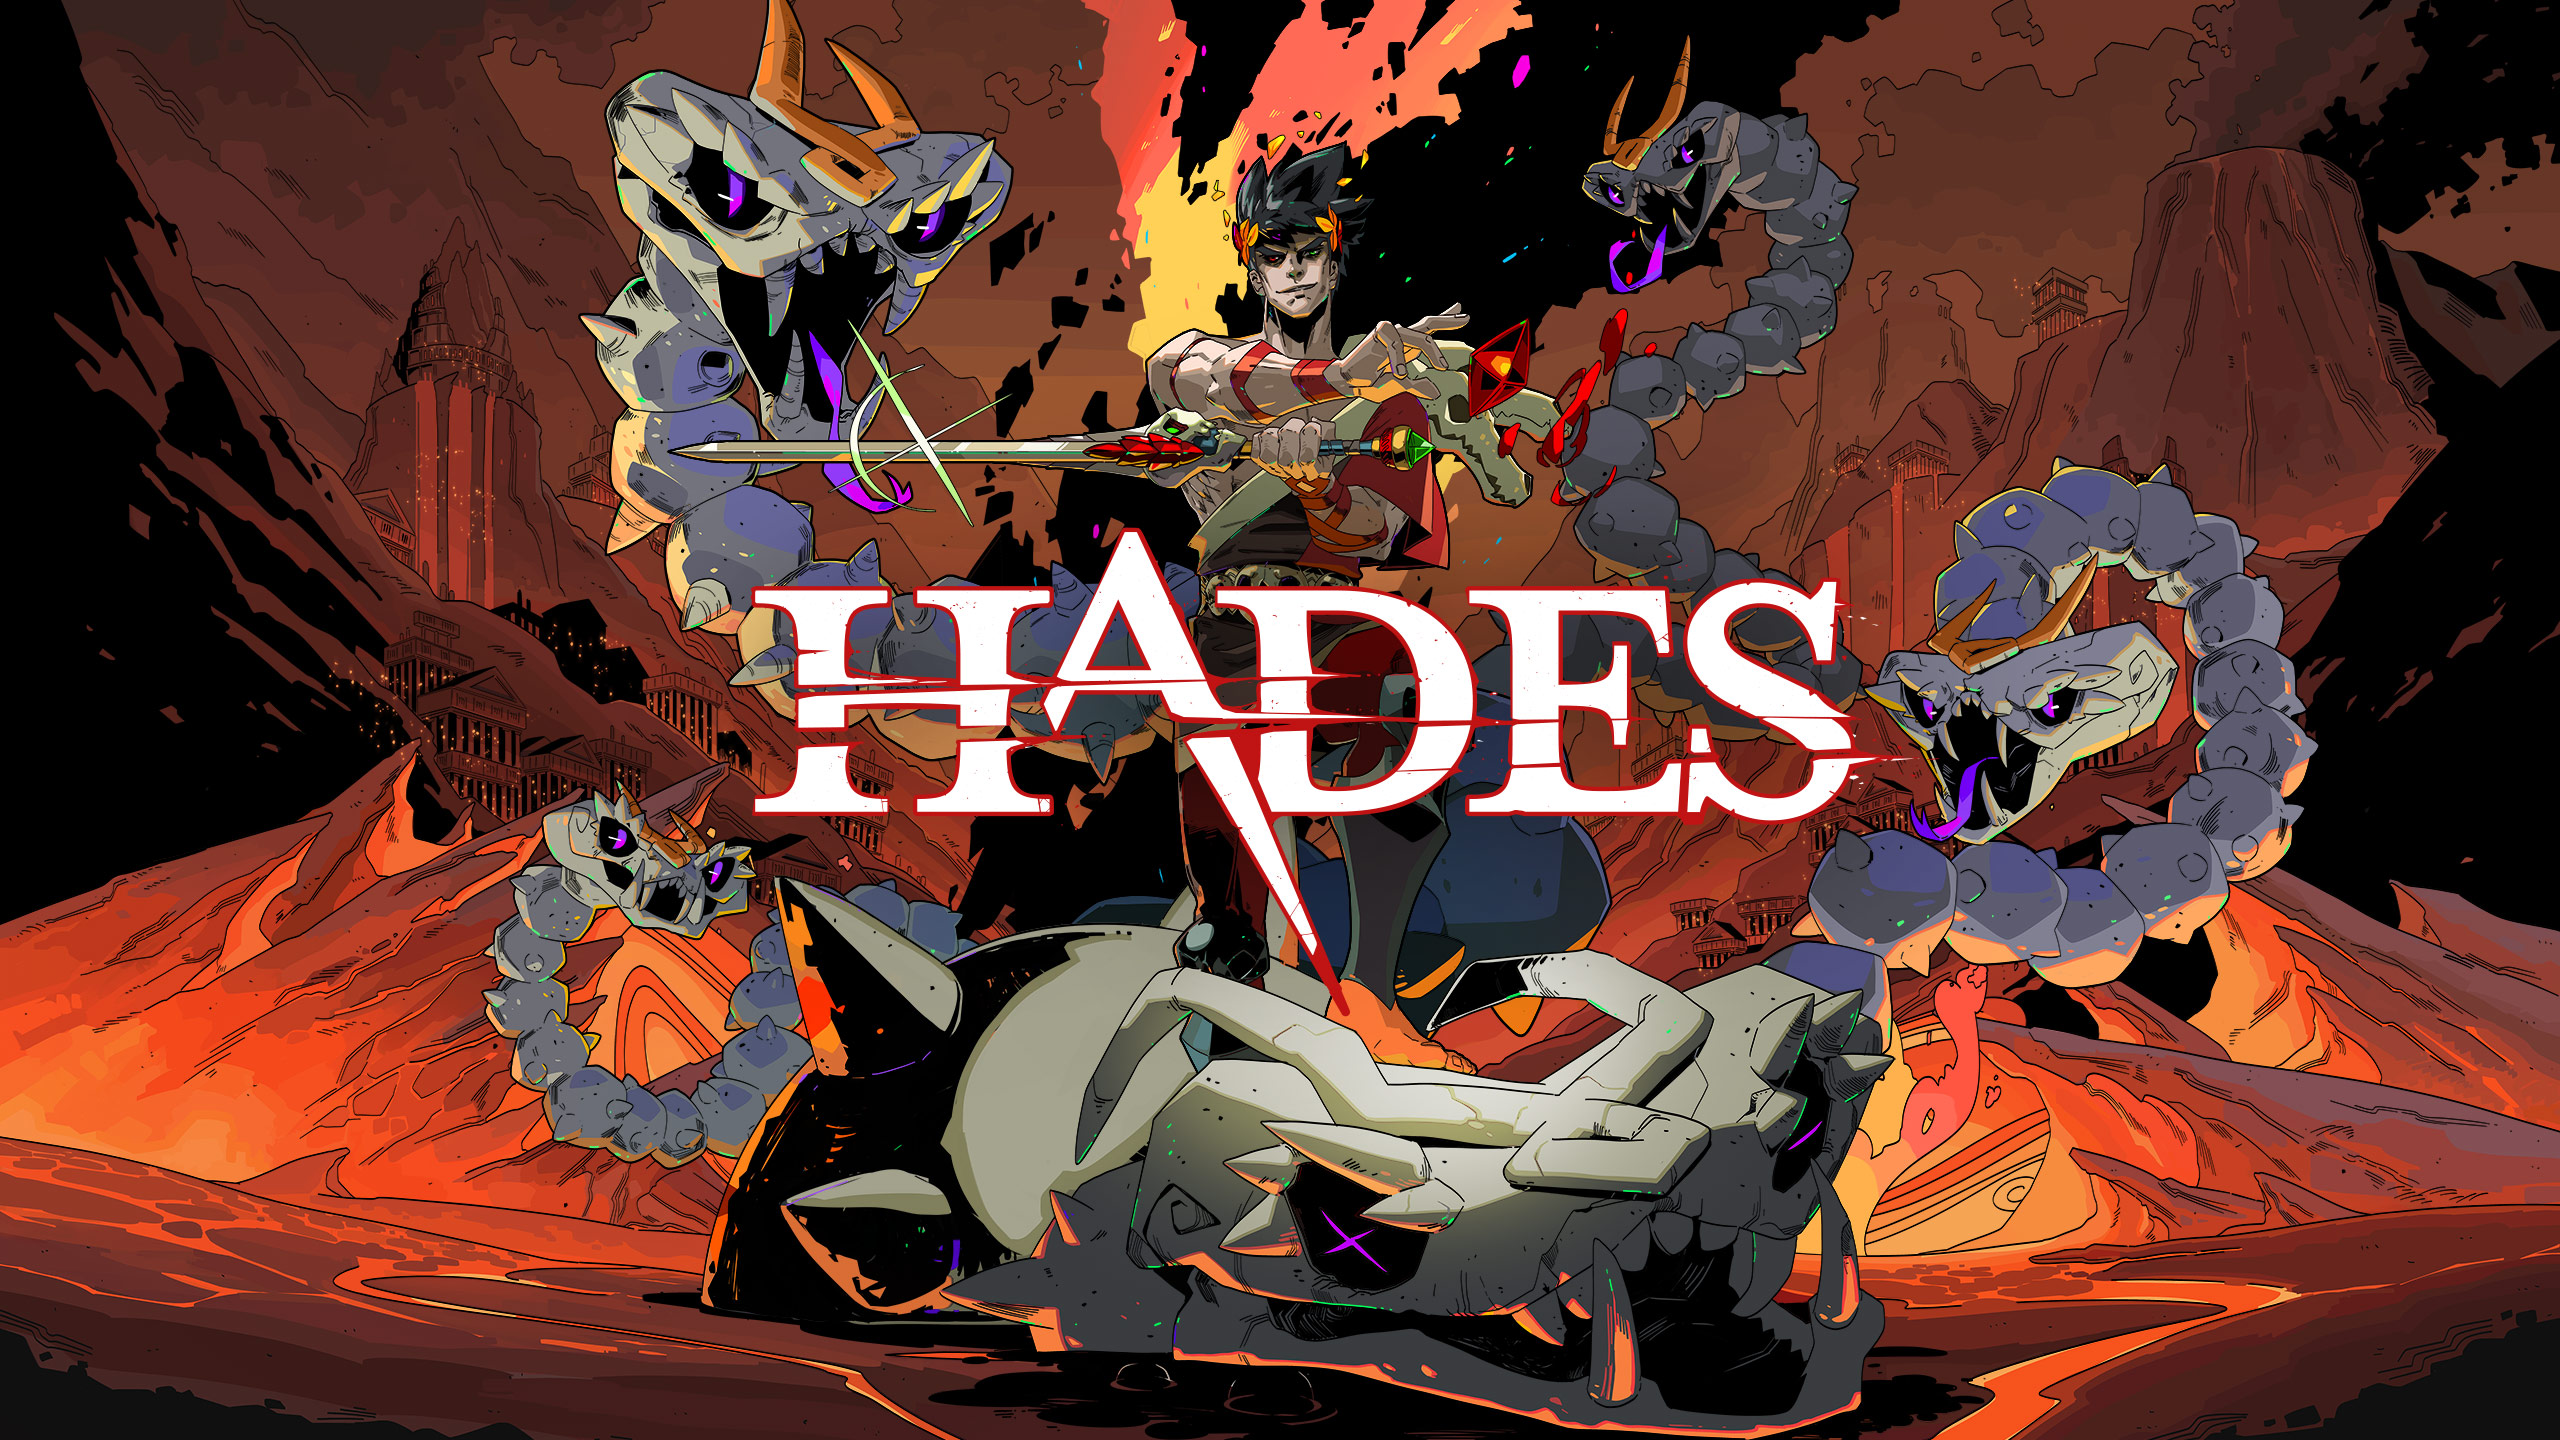 Making A Case for Hades